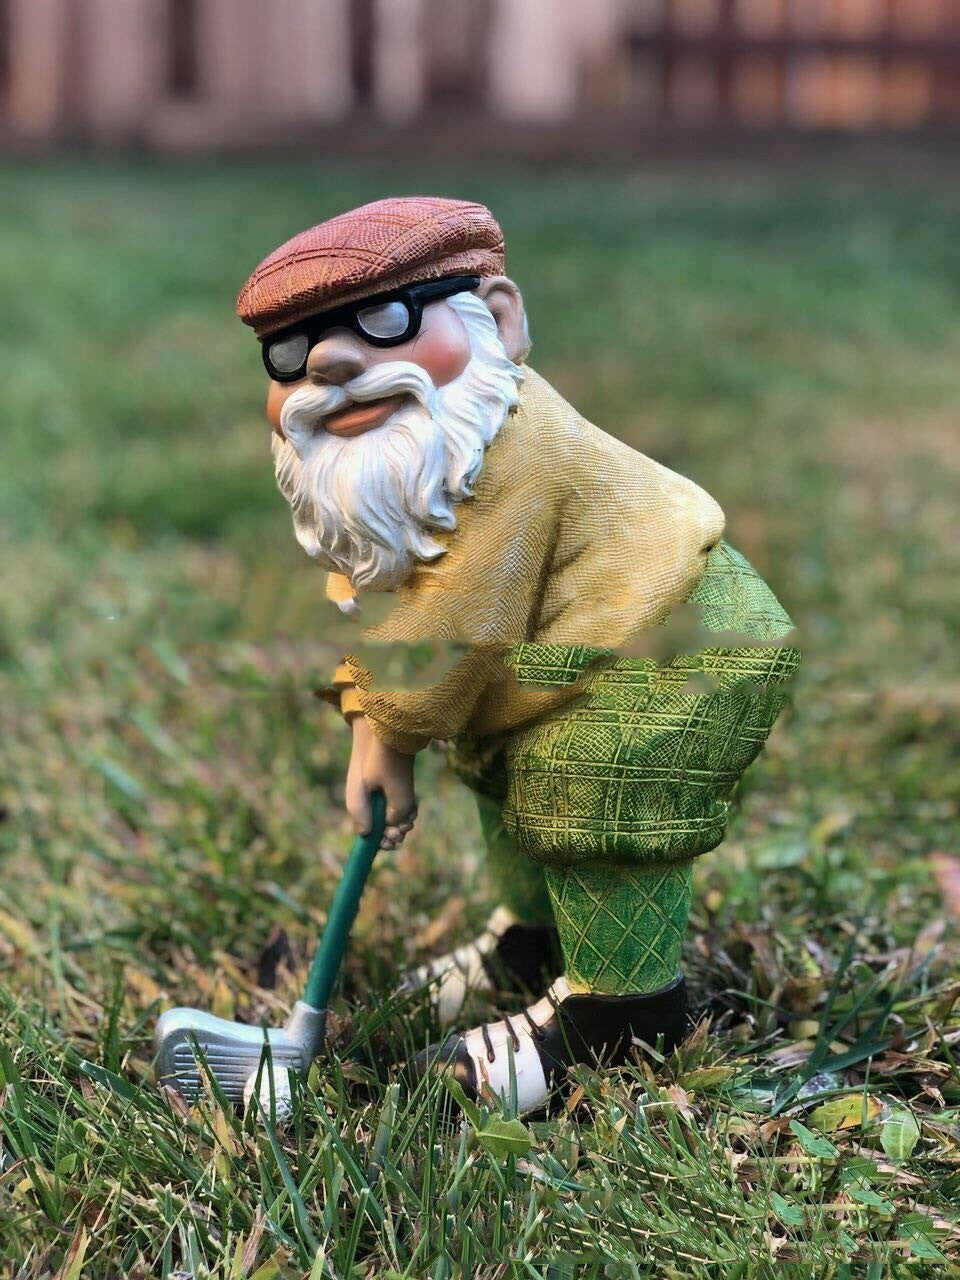 The Garden Is Decorated With Statues Of Golfing Gnomes